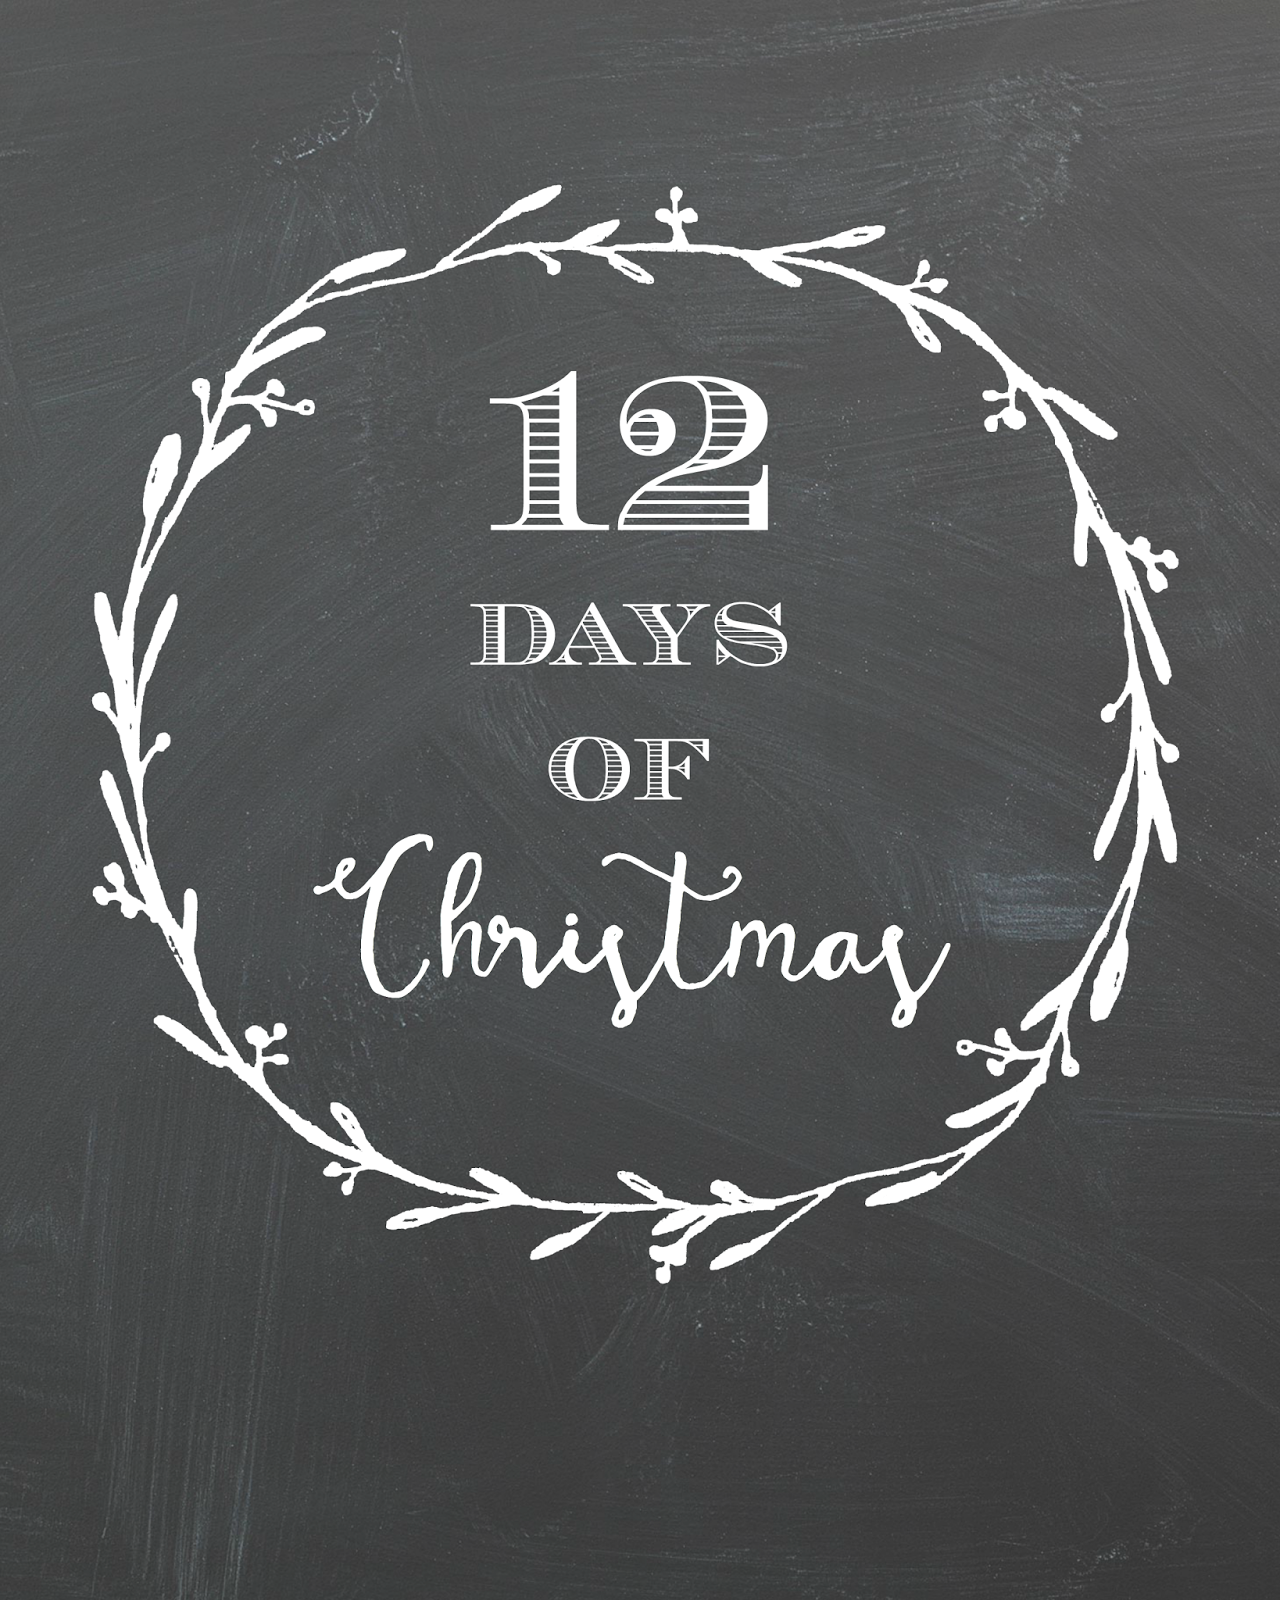 the-12-days-of-christmas-book-by-little-bee-books-official